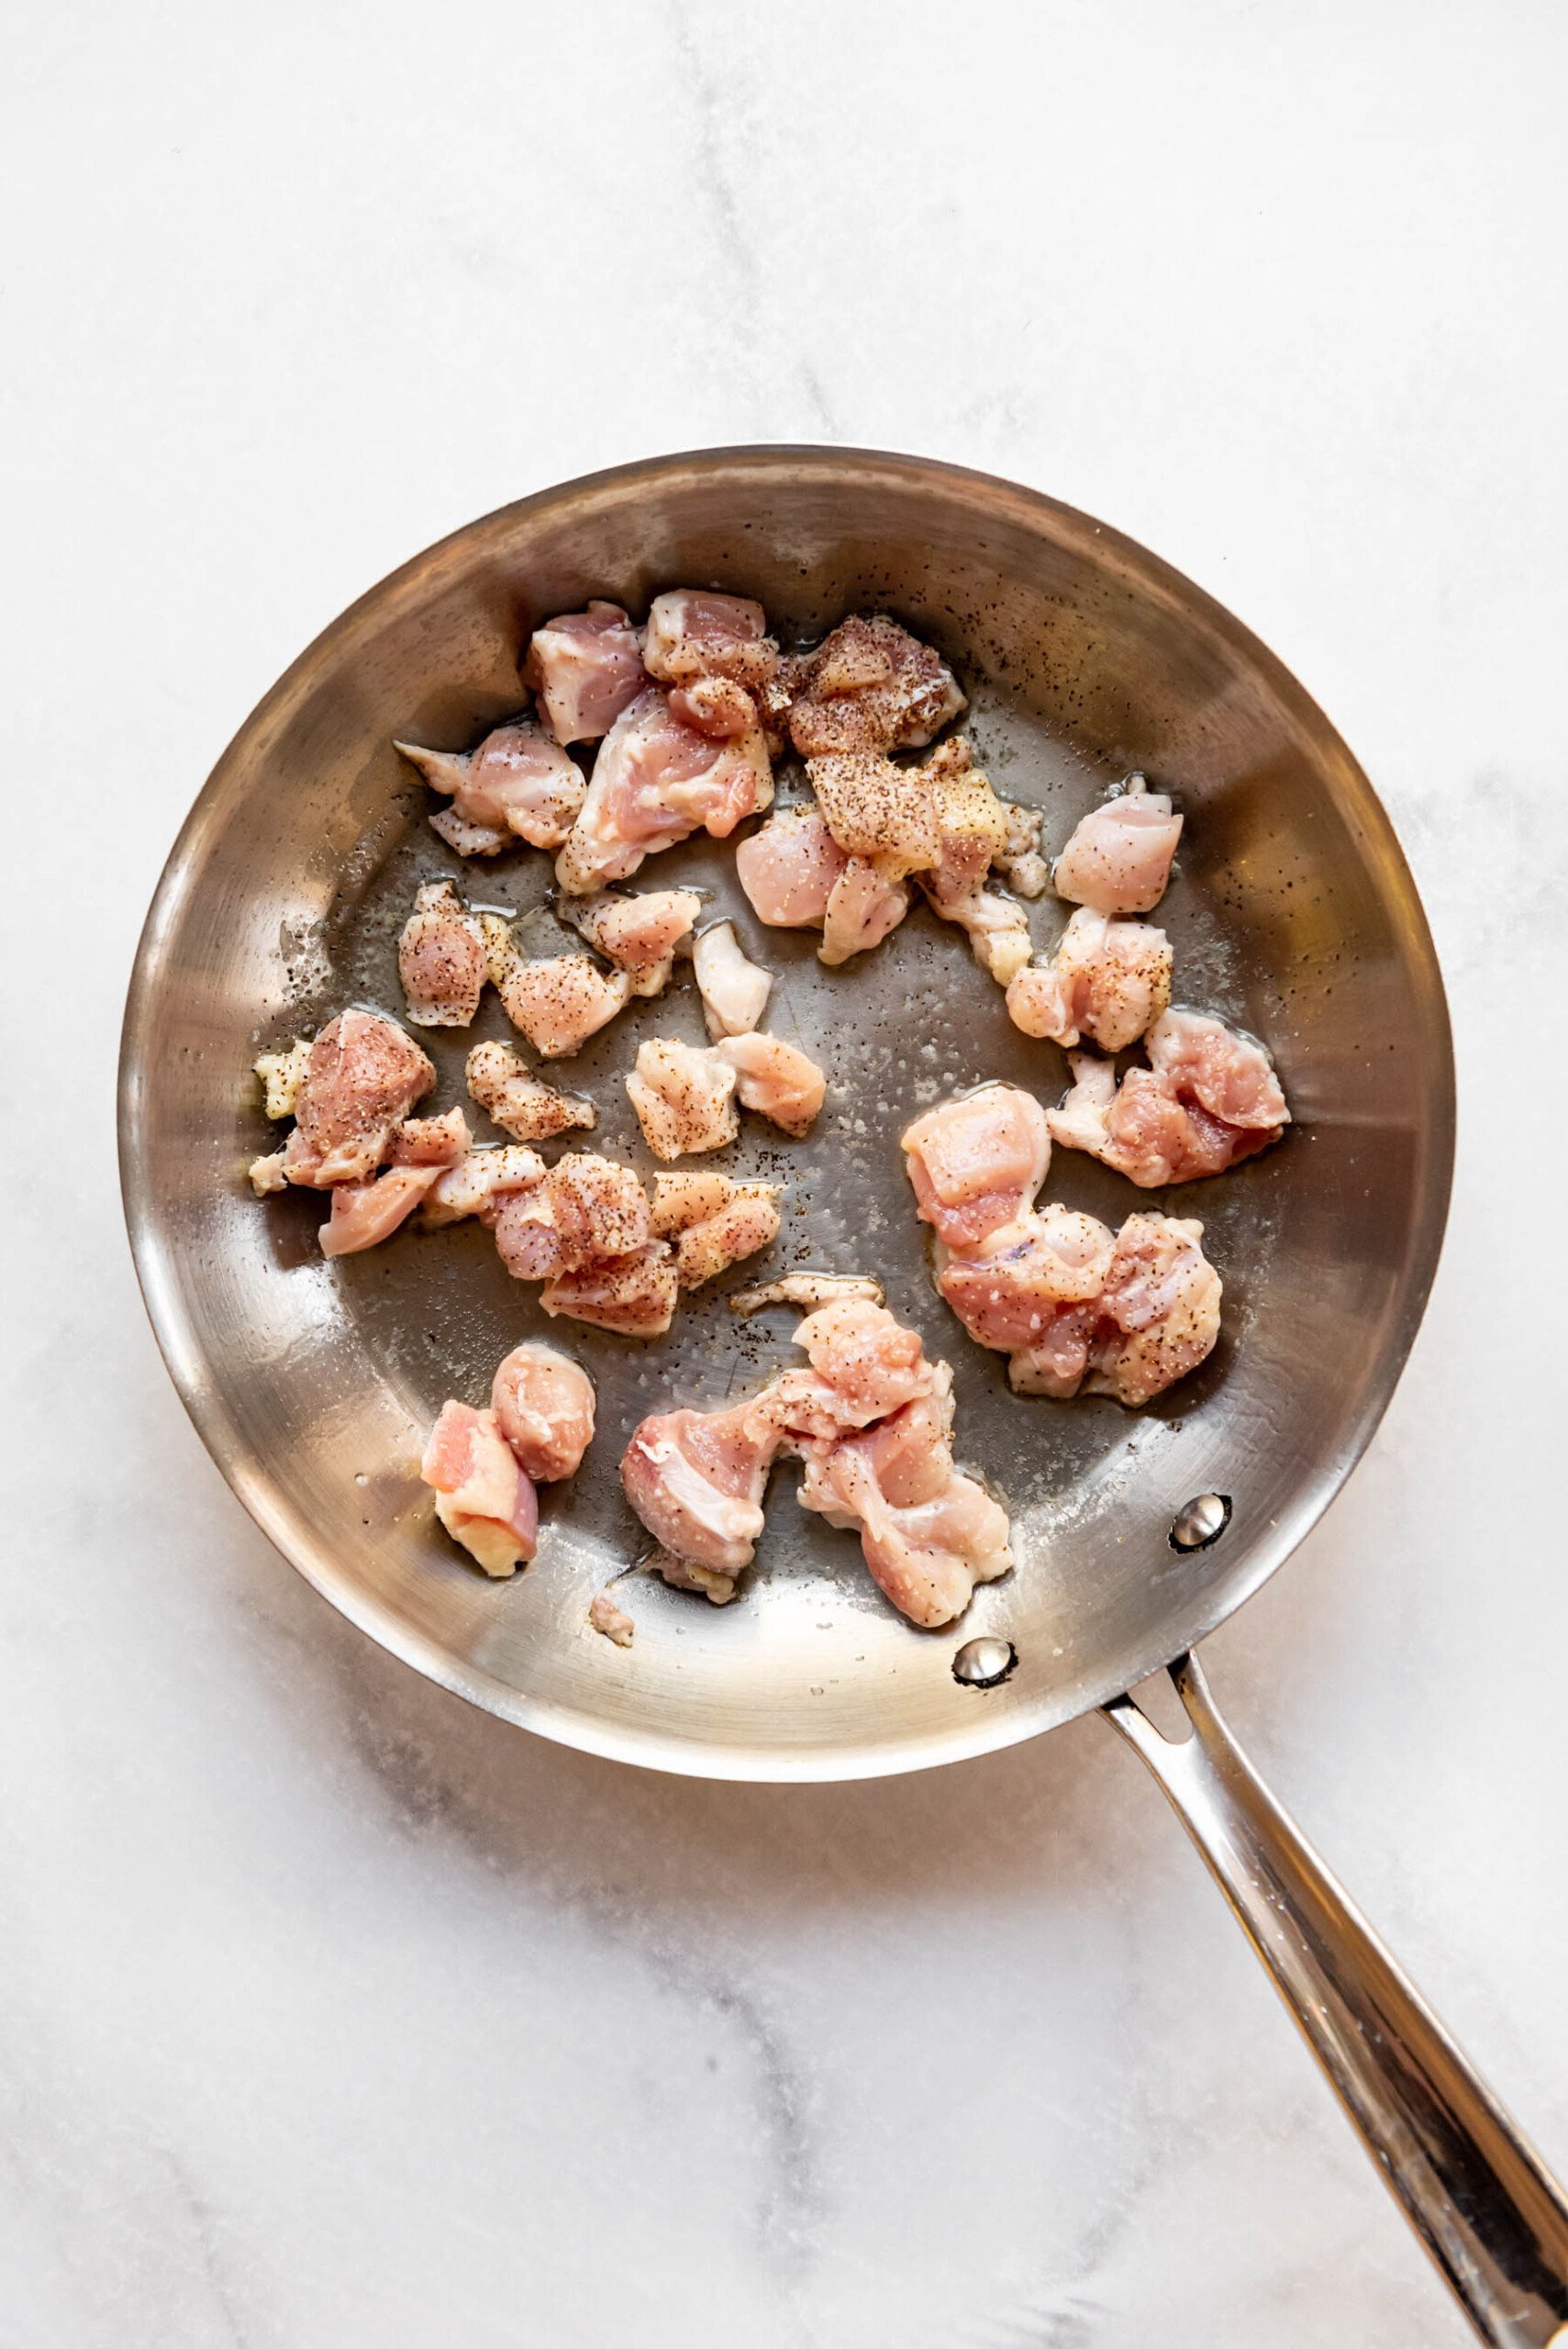 Searing small pieces of chicken in oil in a pan.